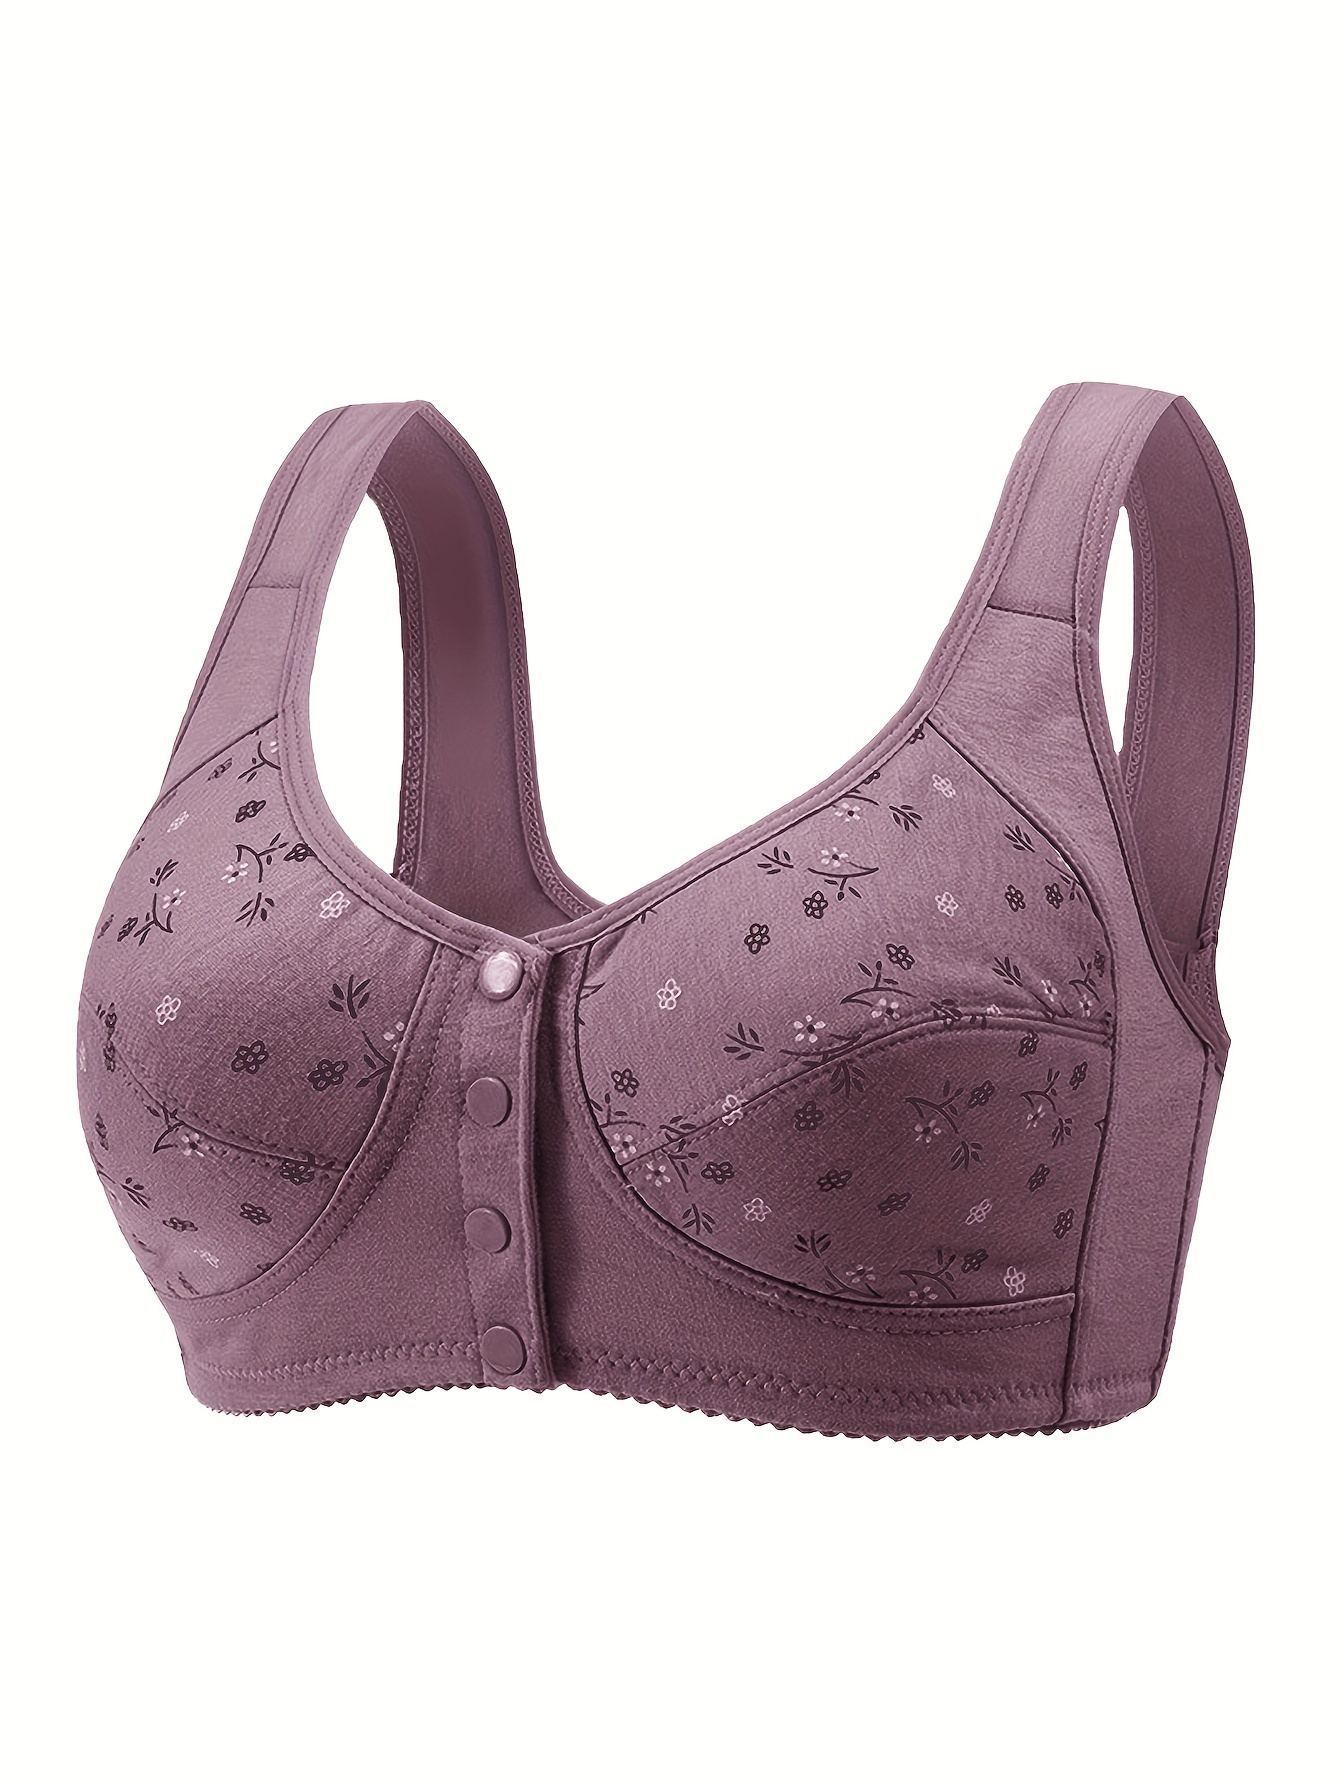 Women's Wirefree Bra Front Button Closeure Bras Full Coverage Soft